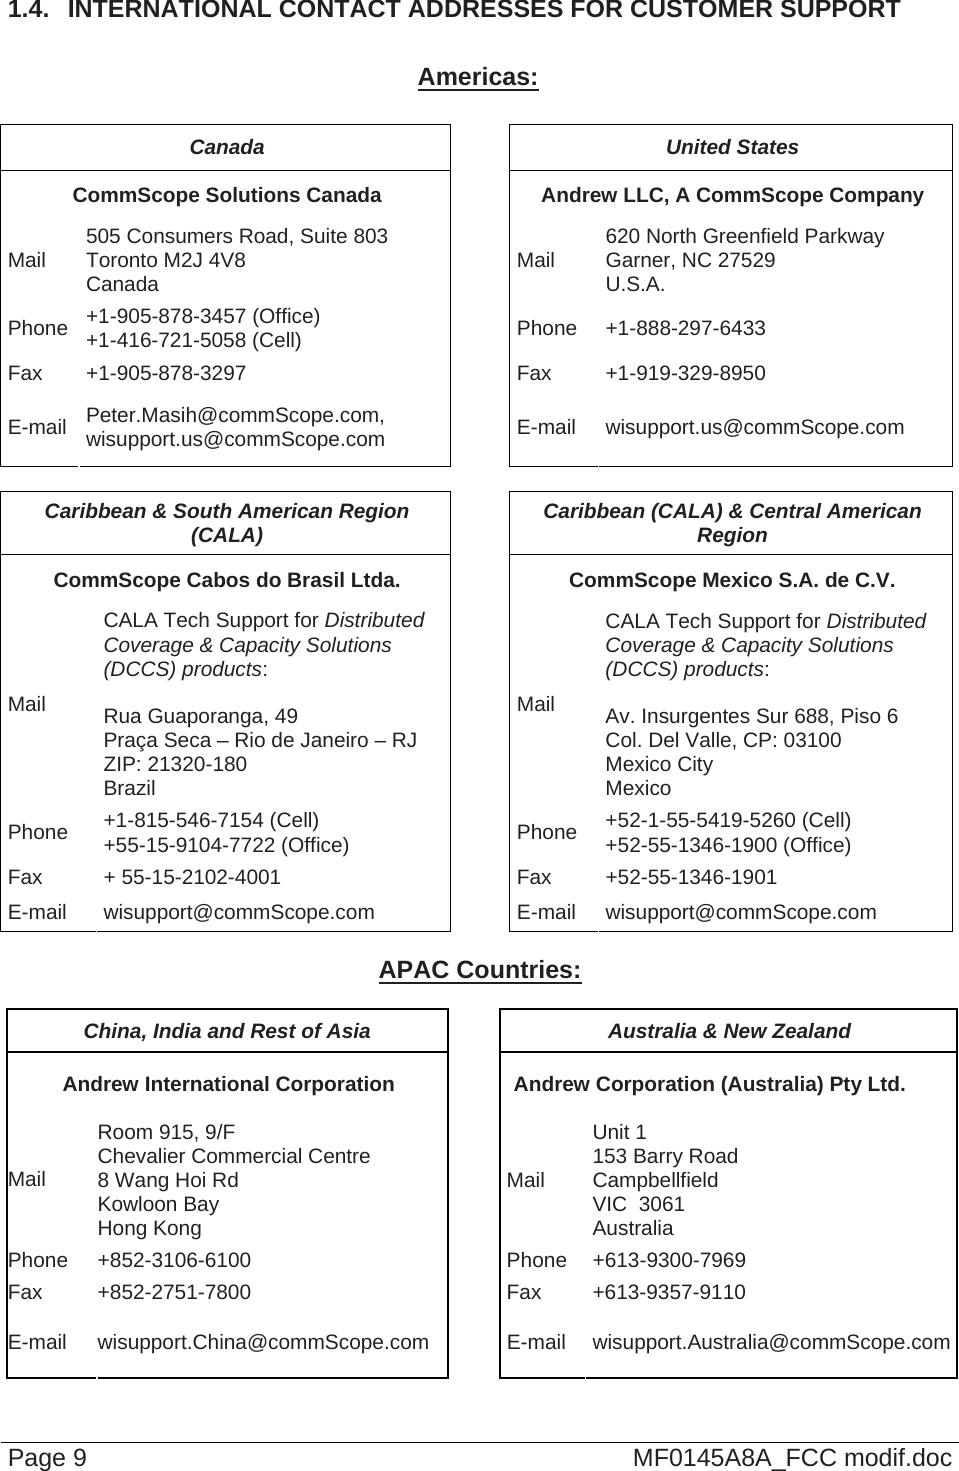  Page 9  MF0145A8A_FCC modif.doc 1.4.  INTERNATIONAL CONTACT ADDRESSES FOR CUSTOMER SUPPORT  Americas:  Canada United States CommScope Solutions Canada  Andrew LLC, A CommScope Company Mail  505 Consumers Road, Suite 803  Toronto M2J 4V8  Canada  Mail  620 North Greenfield Parkway Garner, NC 27529 U.S.A. Phone  +1-905-878-3457 (Office) +1-416-721-5058 (Cell) Phone +1-888-297-6433 Fax +1-905-878-3297  Fax  +1-919-329-8950 E-mail  Peter.Masih@commScope.com, wisupport.us@commScope.com  E-mail wisupport.us@commScope.com  Caribbean &amp; South American Region (CALA)  Caribbean (CALA) &amp; Central American Region  CommScope Cabos do Brasil Ltda.  CommScope Mexico S.A. de C.V. Mail CALA Tech Support for Distributed Coverage &amp; Capacity Solutions (DCCS) products:  Rua Guaporanga, 49 Praça Seca – Rio de Janeiro – RJ ZIP: 21320-180 Brazil Mail CALA Tech Support for Distributed Coverage &amp; Capacity Solutions (DCCS) products:  Av. Insurgentes Sur 688, Piso 6 Col. Del Valle, CP: 03100 Mexico City Mexico Phone  +1-815-546-7154 (Cell) +55-15-9104-7722 (Office)  Phone  +52-1-55-5419-5260 (Cell) +52-55-1346-1900 (Office) Fax + 55-15-2102-4001  Fax +52-55-1346-1901  E-mail wisupport@commScope.com  E-mail wisupport@commScope.com  APAC Countries:  China, India and Rest of Asia  Australia &amp; New Zealand Andrew International Corporation  Andrew Corporation (Australia) Pty Ltd. Mail Room 915, 9/F  Chevalier Commercial Centre 8 Wang Hoi Rd Kowloon Bay  Hong Kong Mail Unit 1 153 Barry Road Campbellfield  VIC  3061 Australia Phone +852-3106-6100  Phone +613-9300-7969 Fax +852-2751-7800  Fax +613-9357-9110 E-mail wisupport.China@commScope.com  E-mail wisupport.Australia@commScope.com 